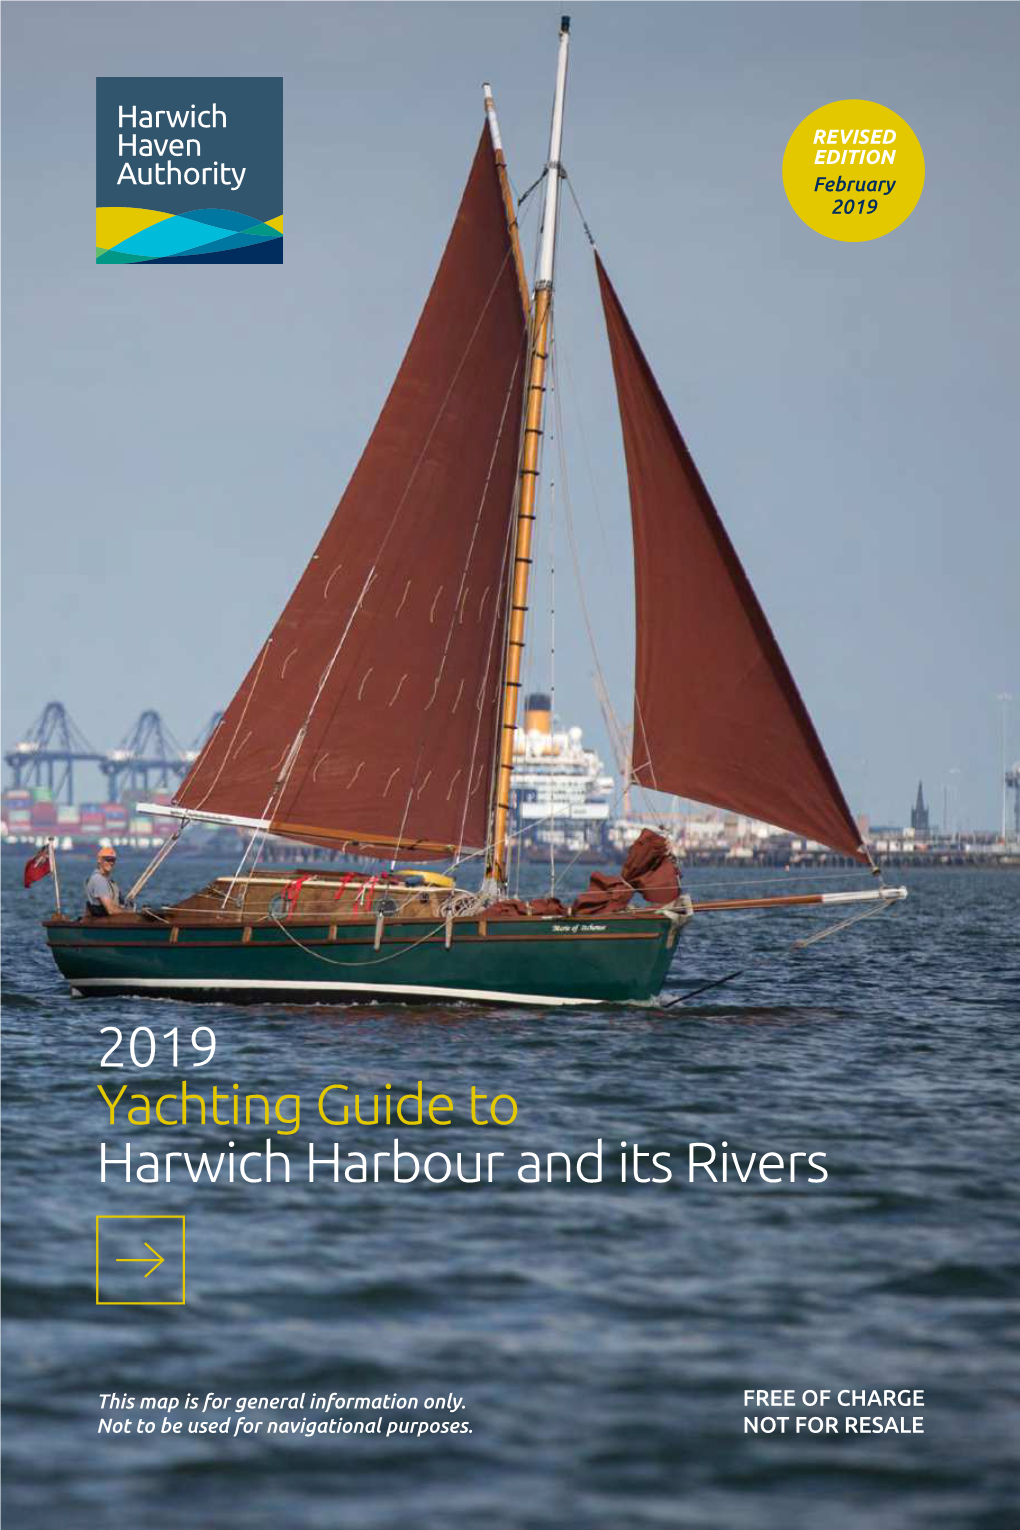 2019 Yachting Guide to Harwich Harbour and Its Rivers